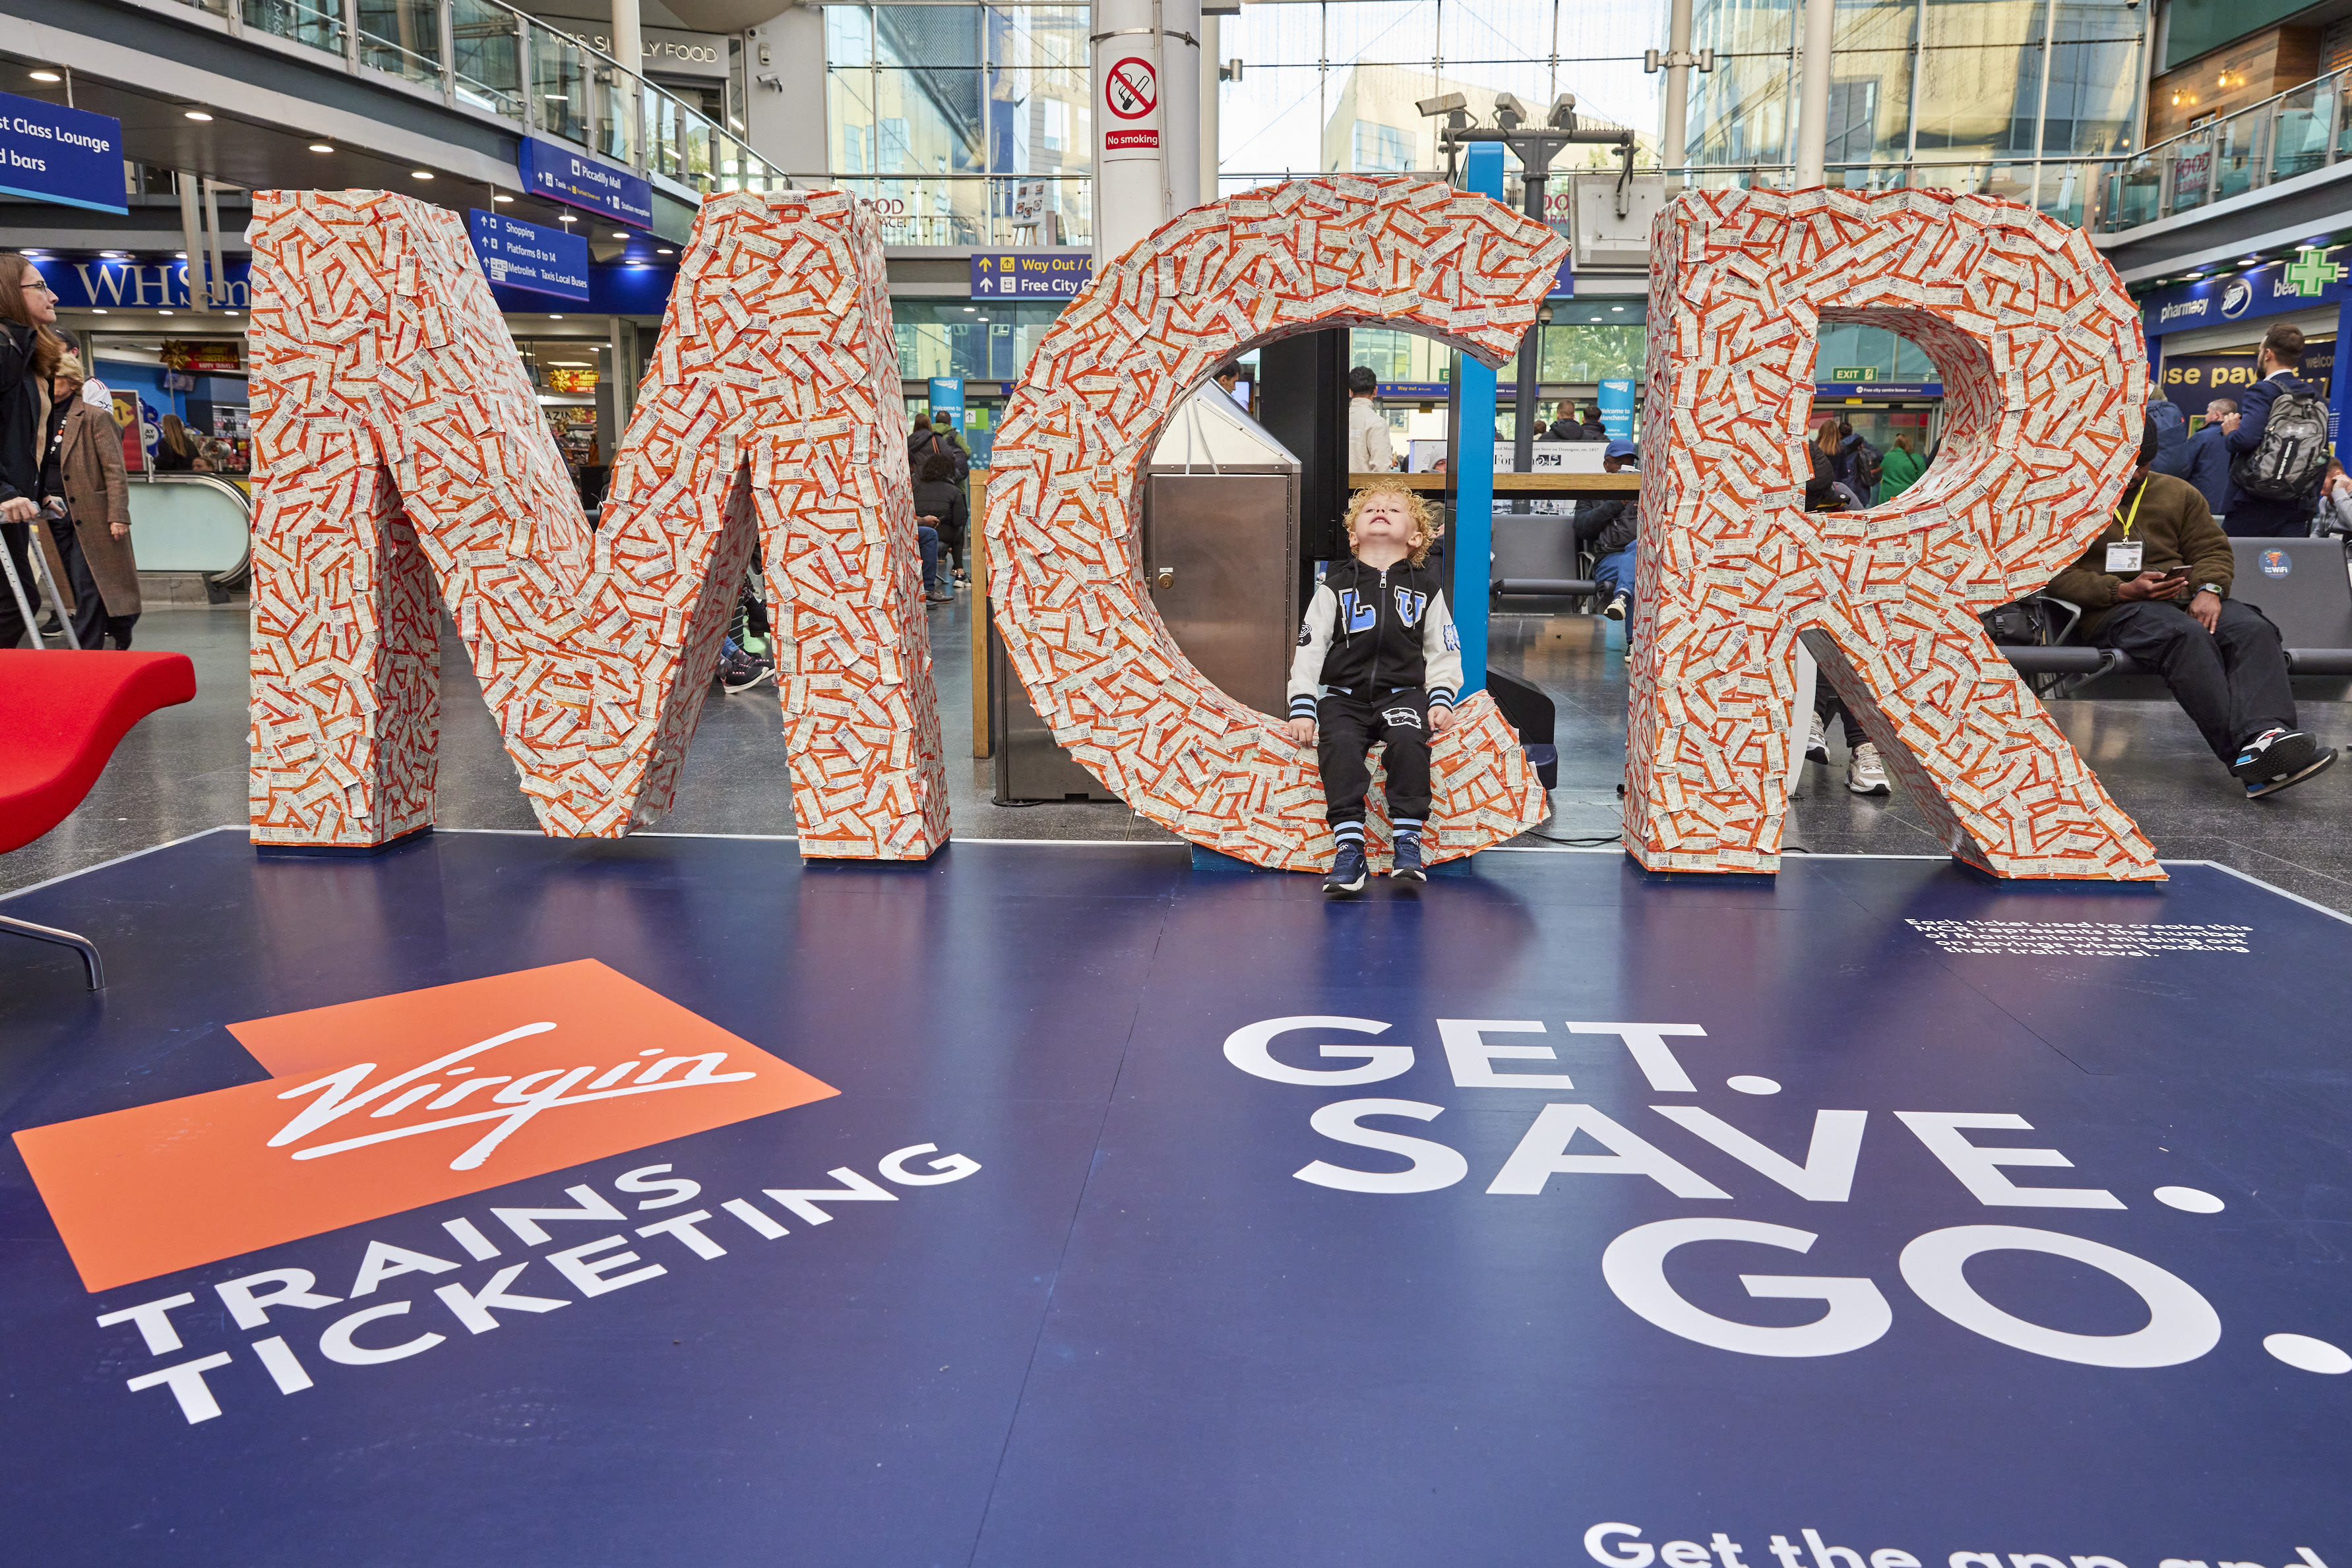 Child standing in front of Virgin Trains Ticketing pop up in Manchester Piccadilly Station